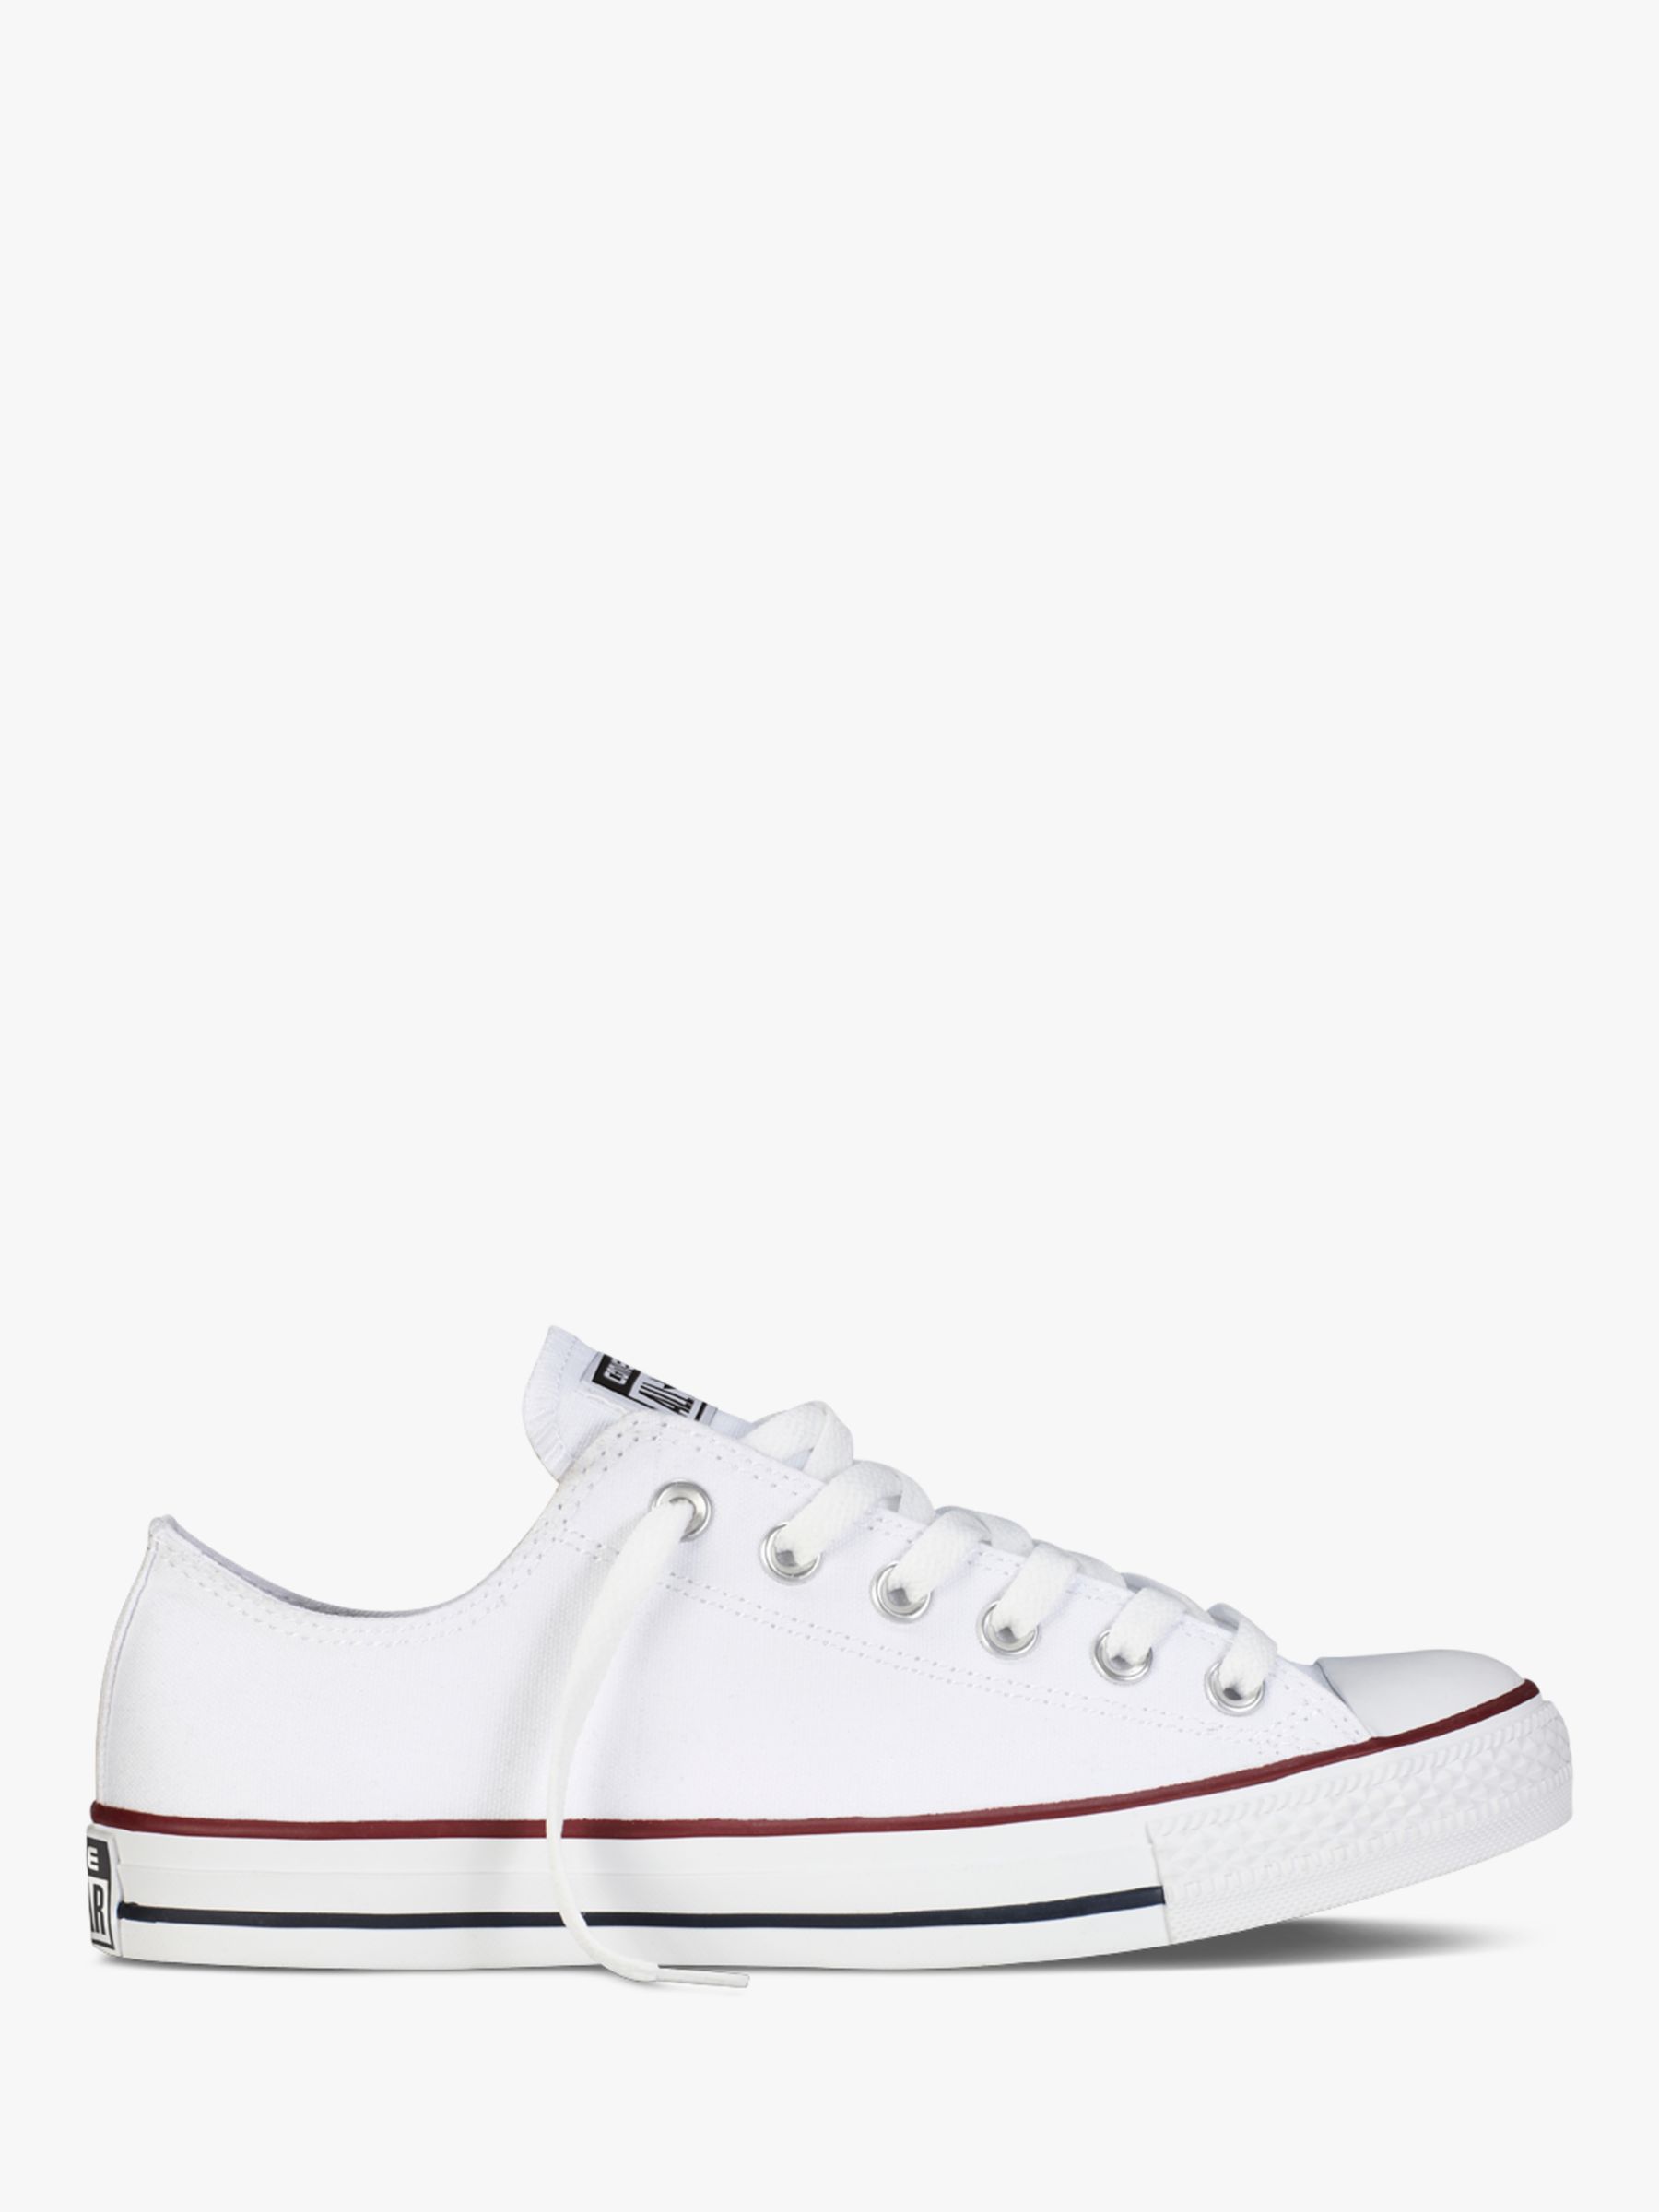 Converse Children's Chuck Taylor All Star Trainers, White at John Lewis ...